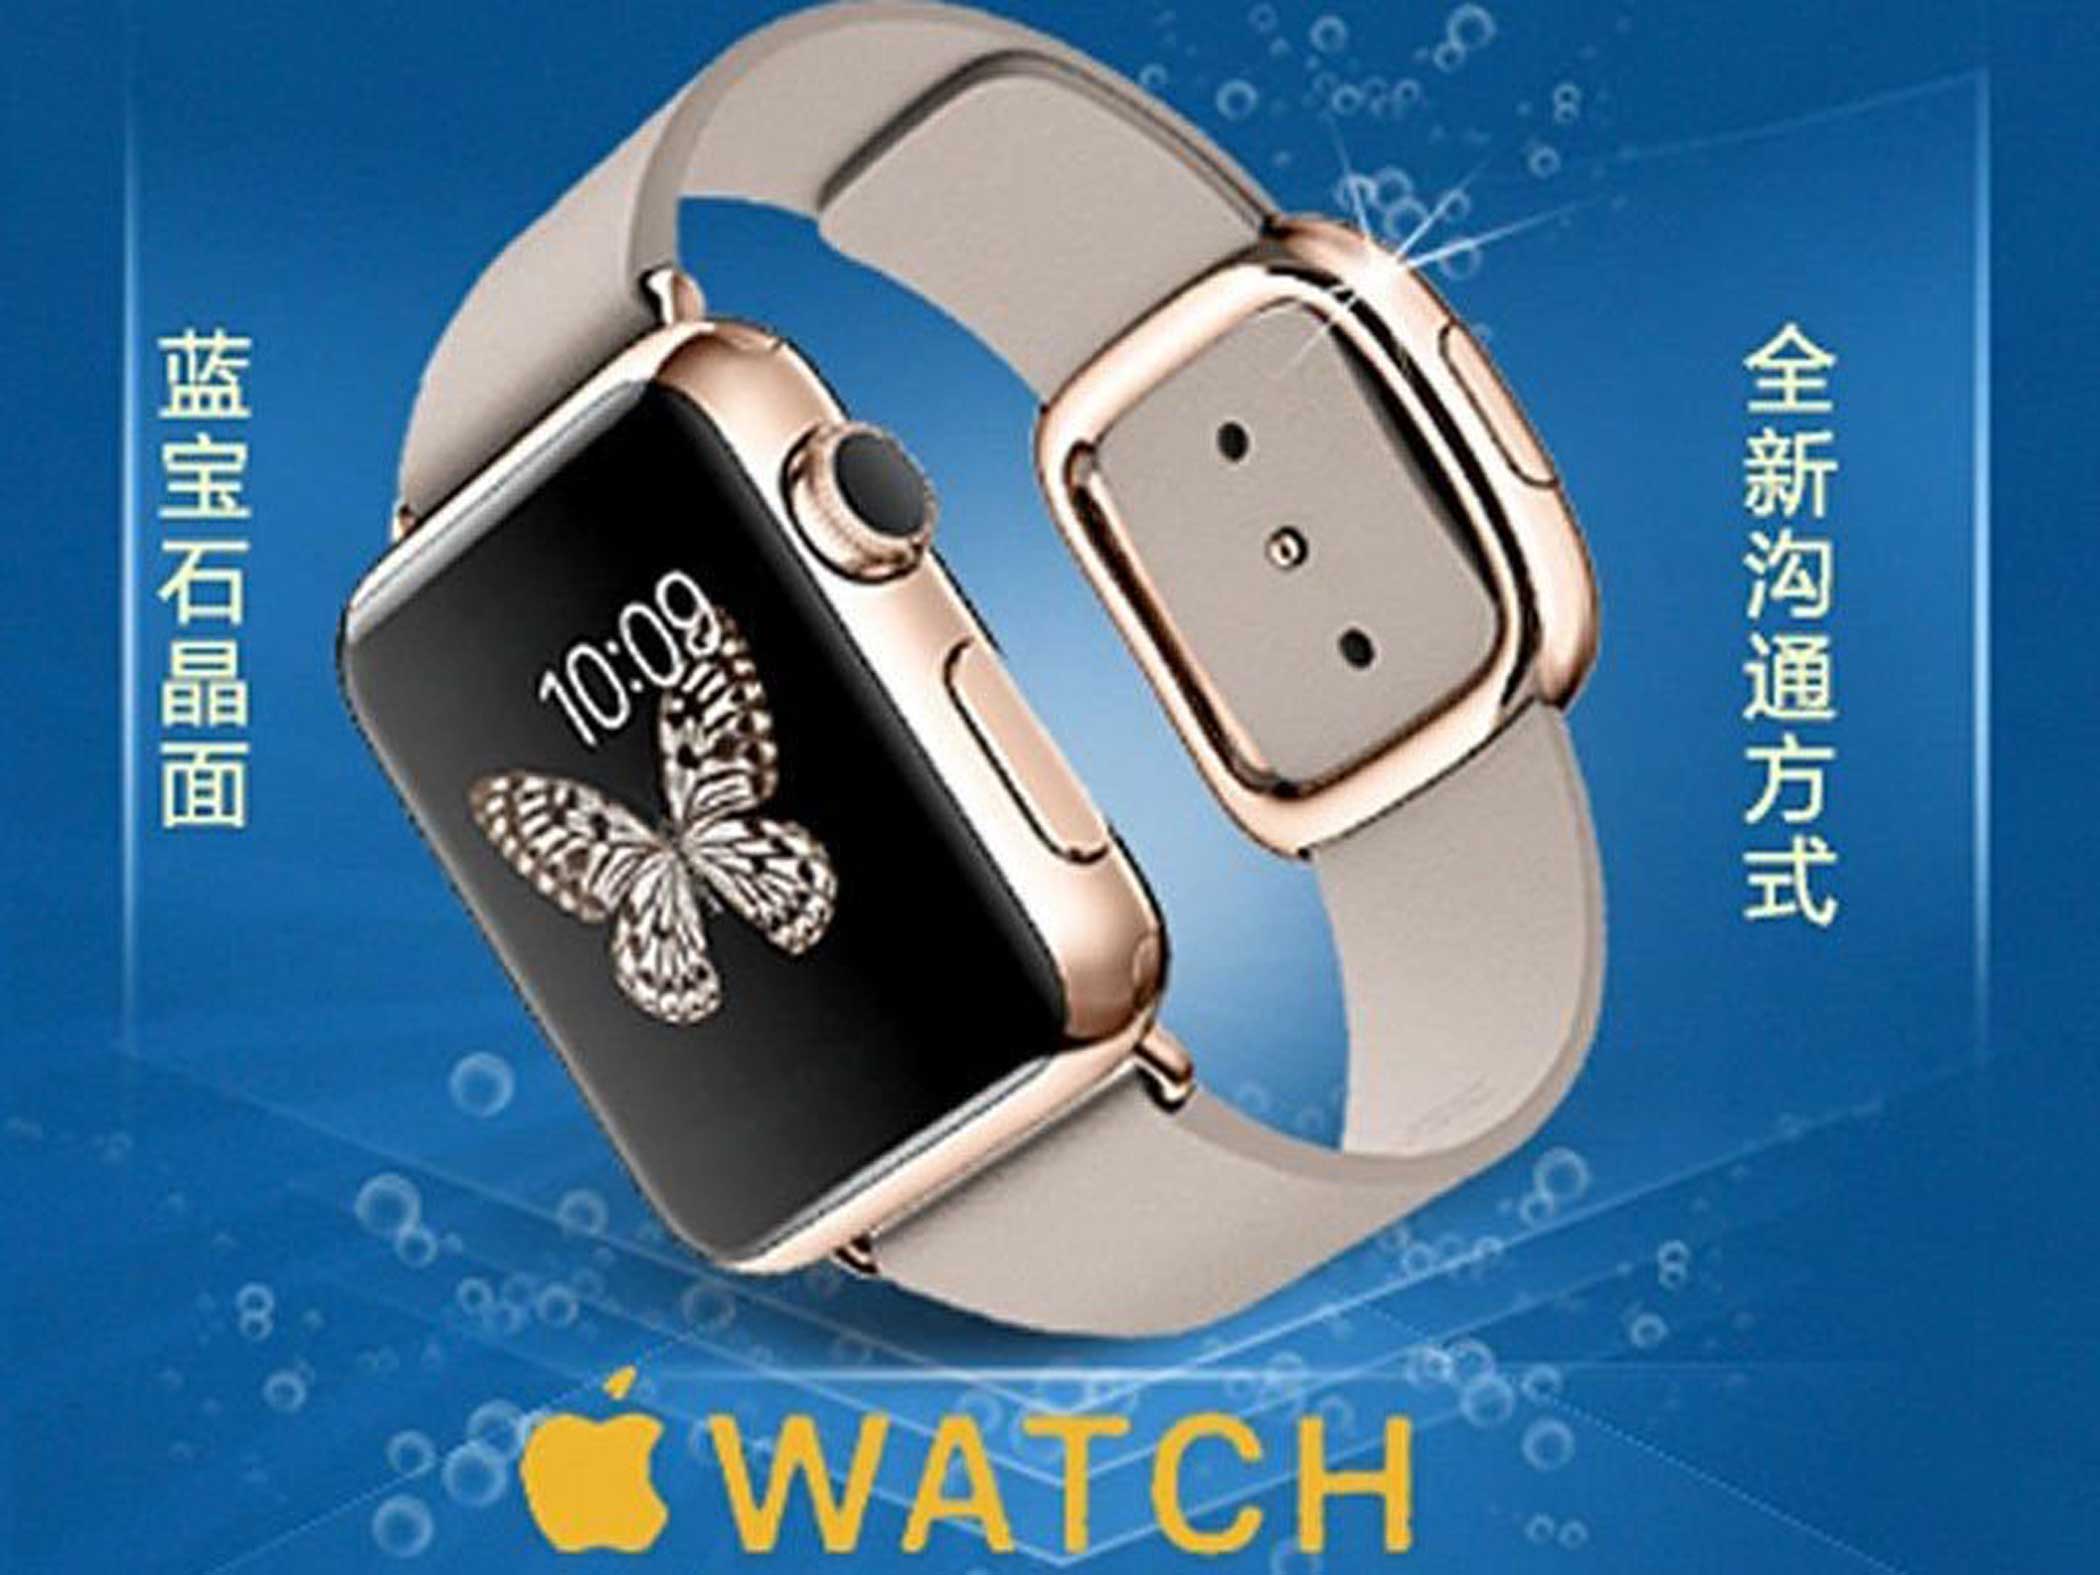 D-WATCH sold by Gemini TB Creative Design costs $47. The "Apple Watch" sold by Xiaowu Telecommunications costs less than $25.